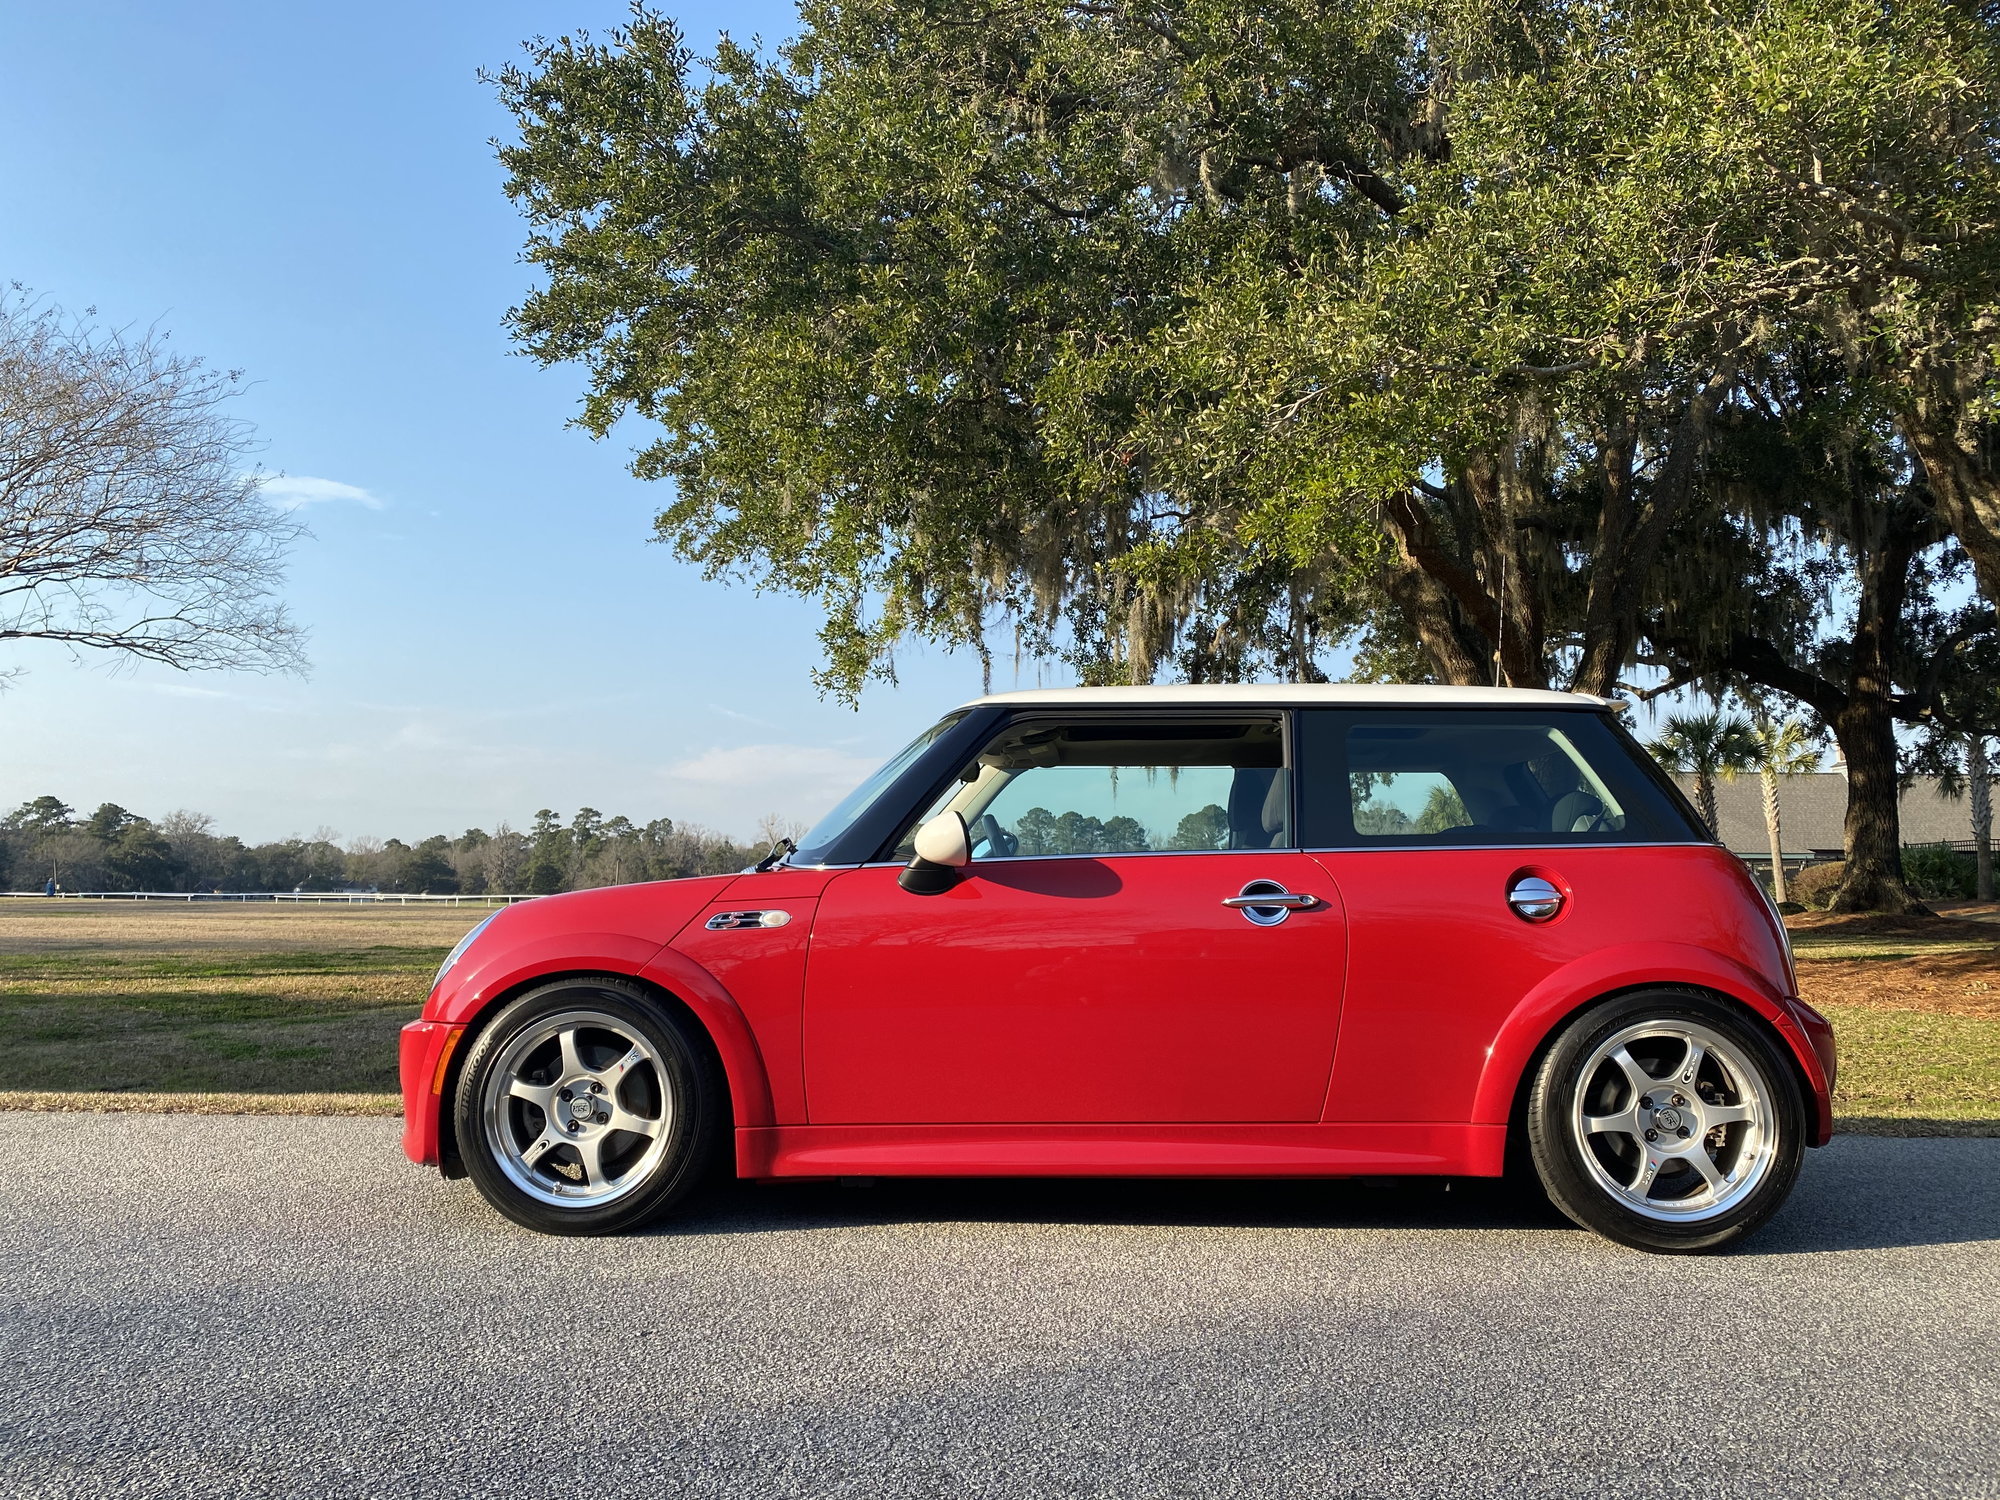 02 R53 Mini Cooper, 32k miles, Stage 3, Nicest In The Country